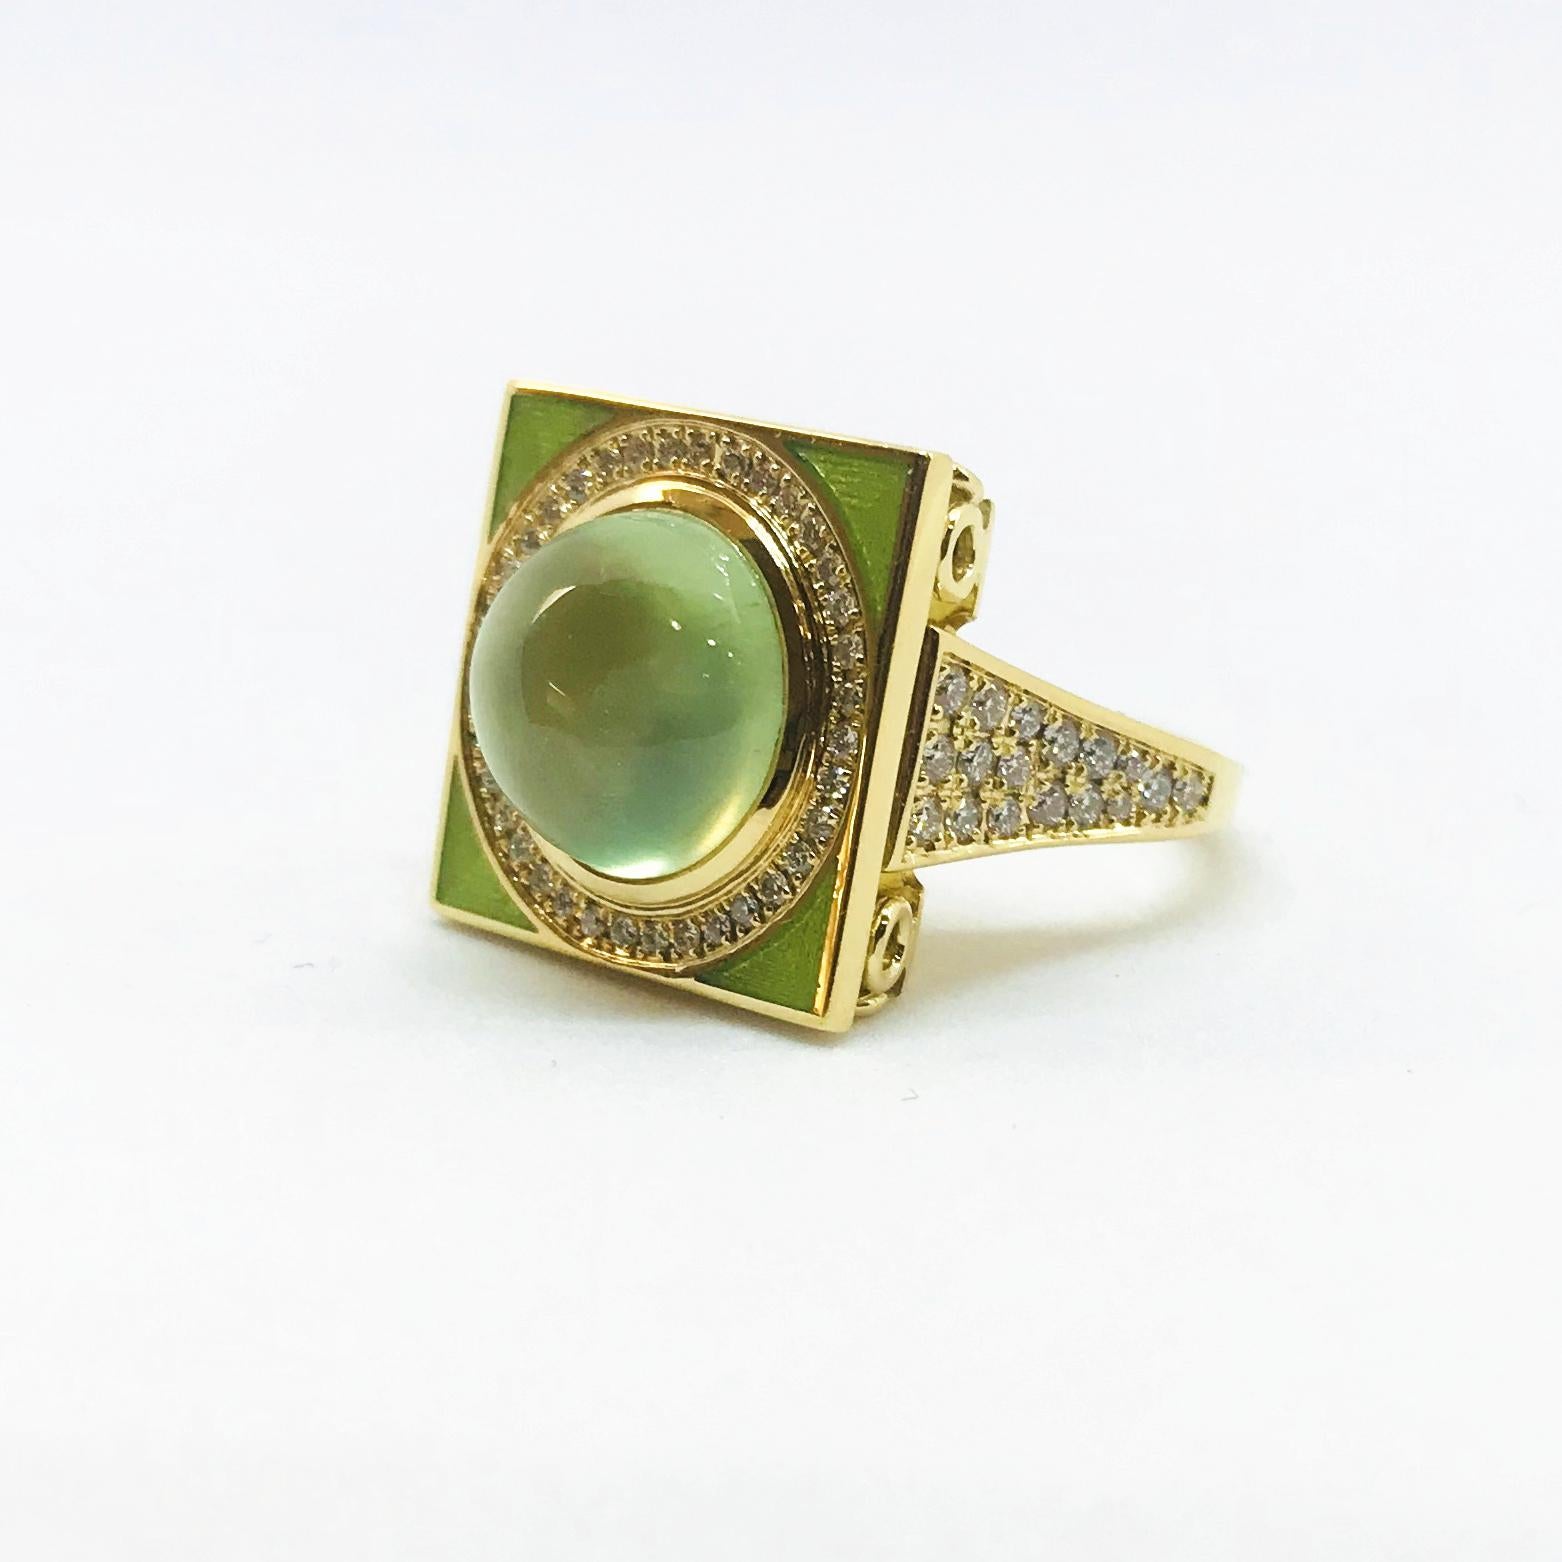 One 18 Karat yellow gold ring with one cabochon-cut green Prehnite gem surrounded by a row of round brilliant cut diamonds centered in a square-shaped top centerpiece (measuring 17 mm L x 17 mm W) with apple green enamel accent. The centerpiece